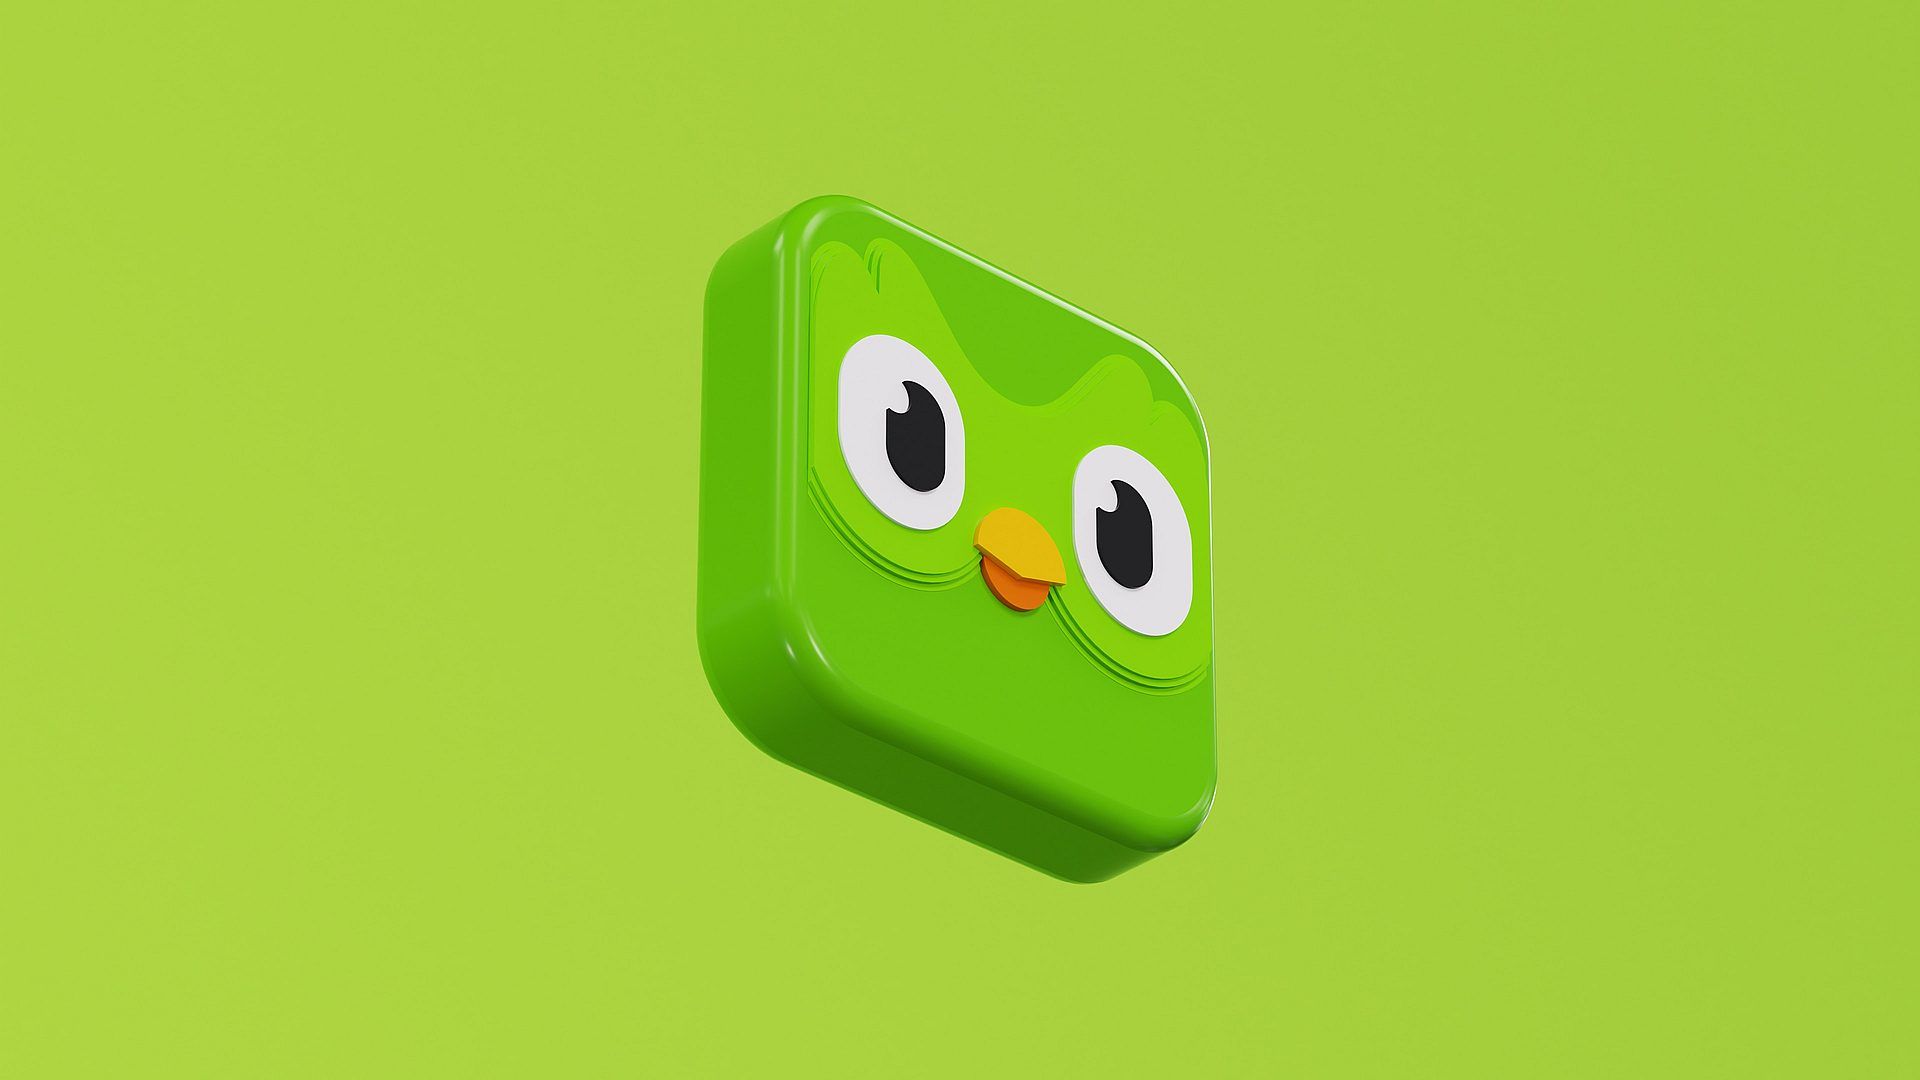 Explore melting Duolingo app Icon: A playful twist to keep users engaged and smiling! Keep reading and learn everything you need to know about it!